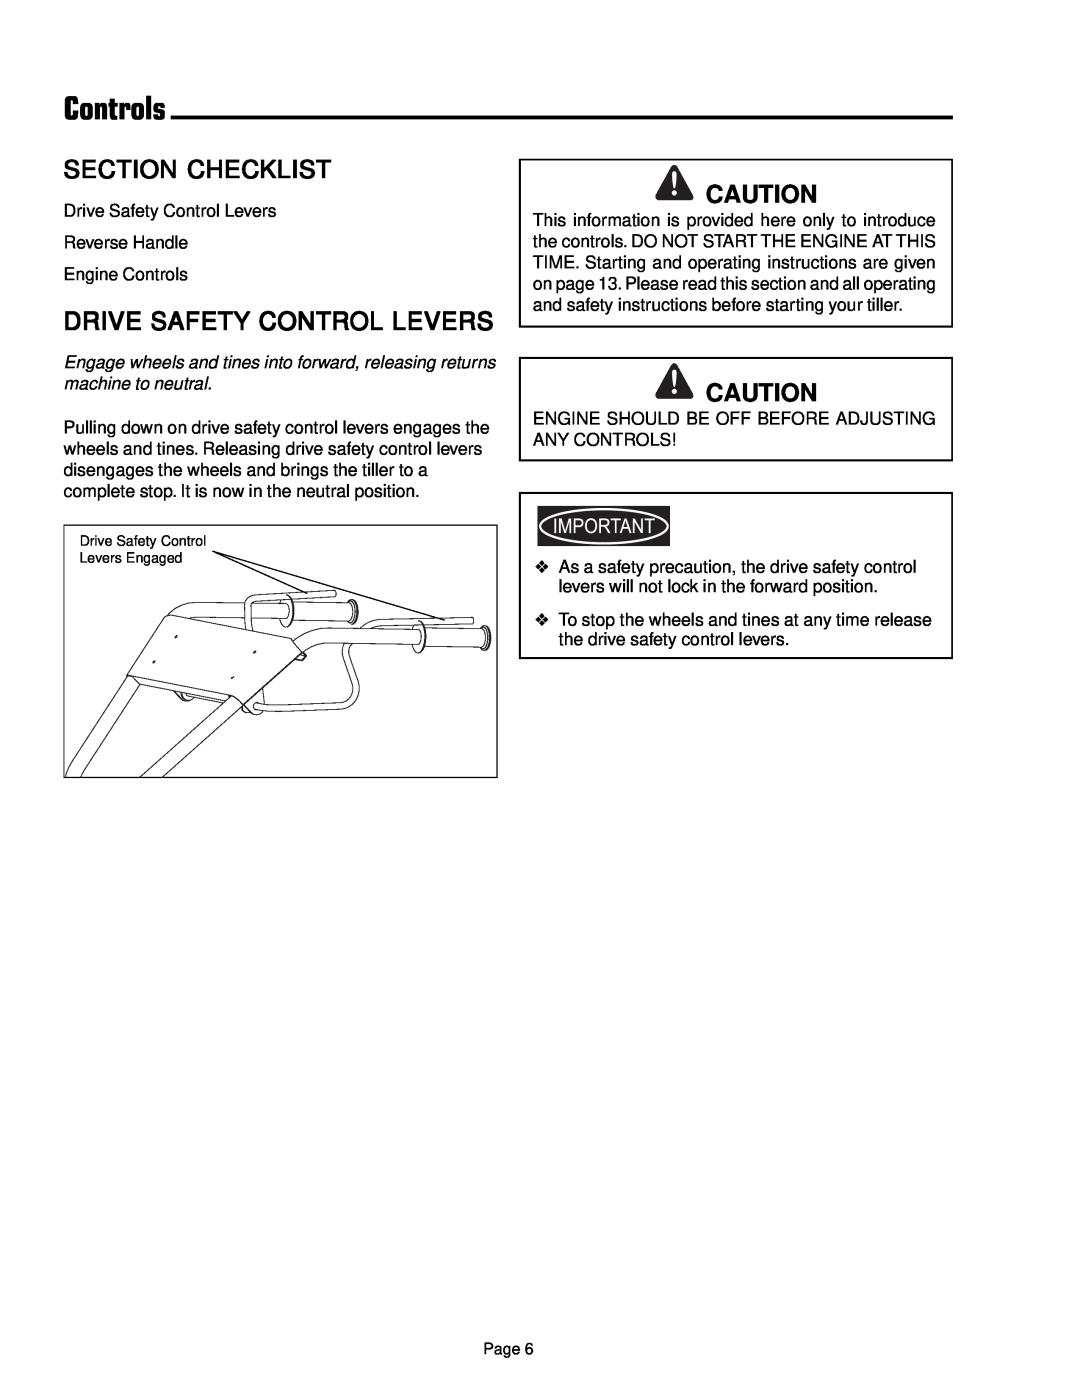 Simplicity 1693847 manual Controls, Drive Safety Control Levers, Section Checklist 